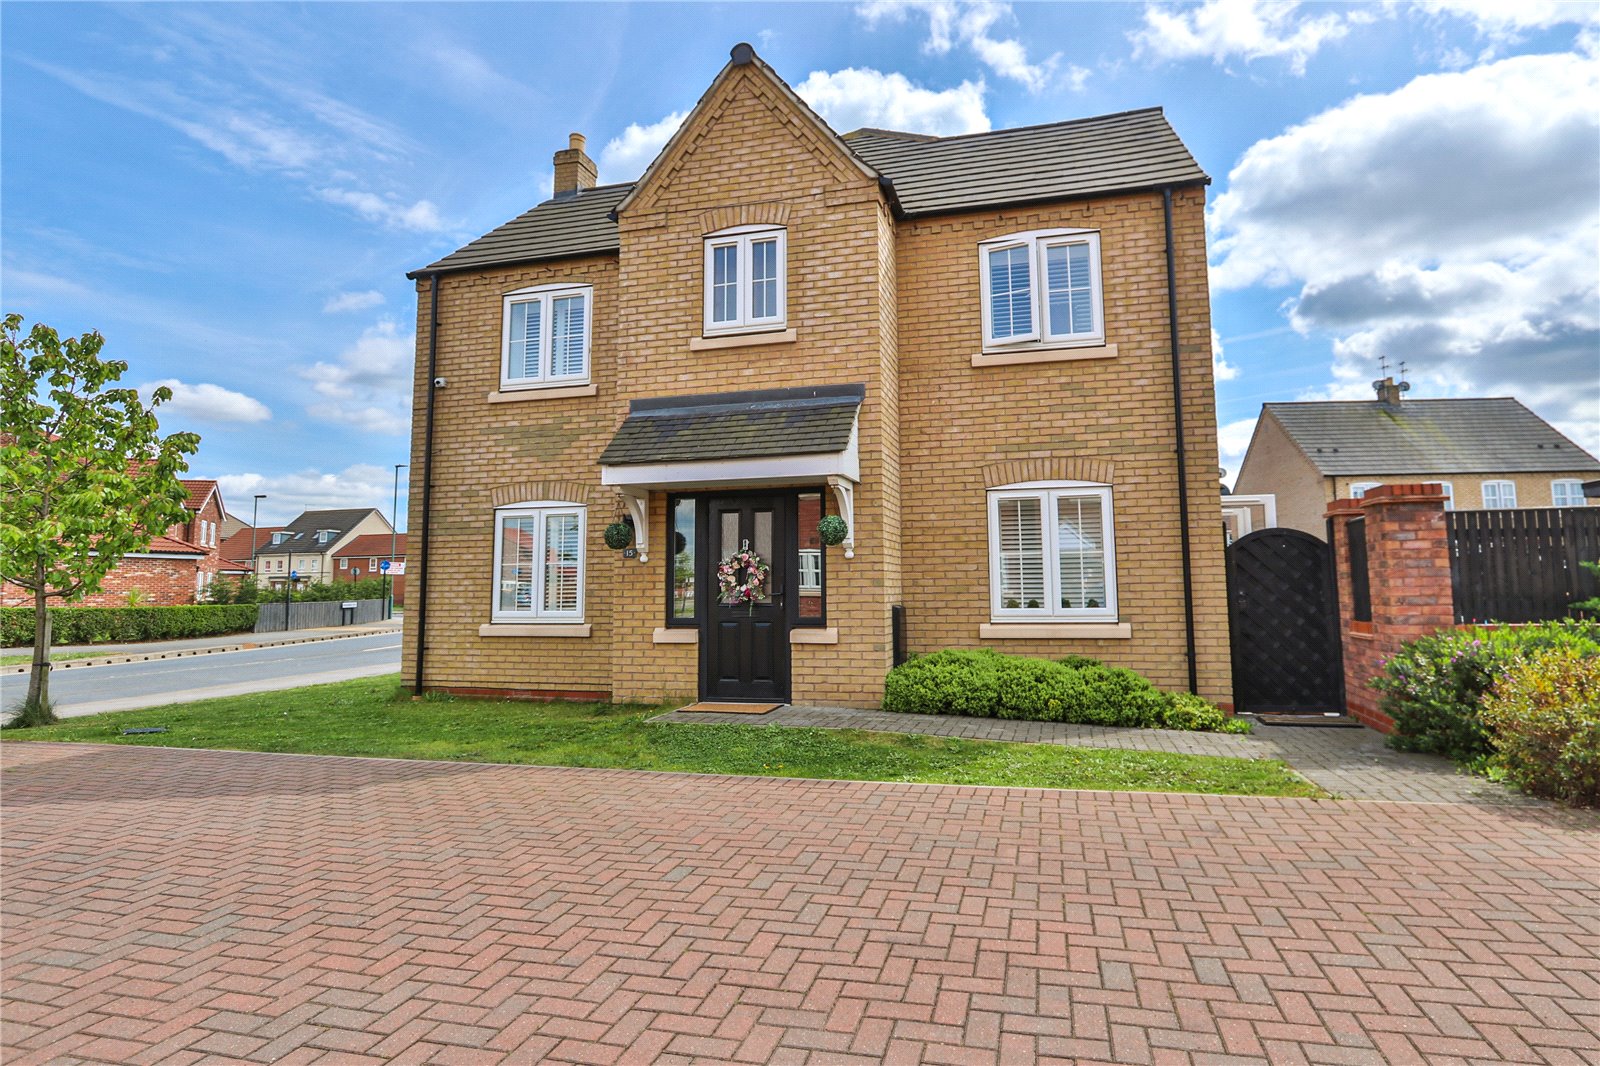 3 bed house for sale in Hamlet Drive, Kingswood - Property Image 1